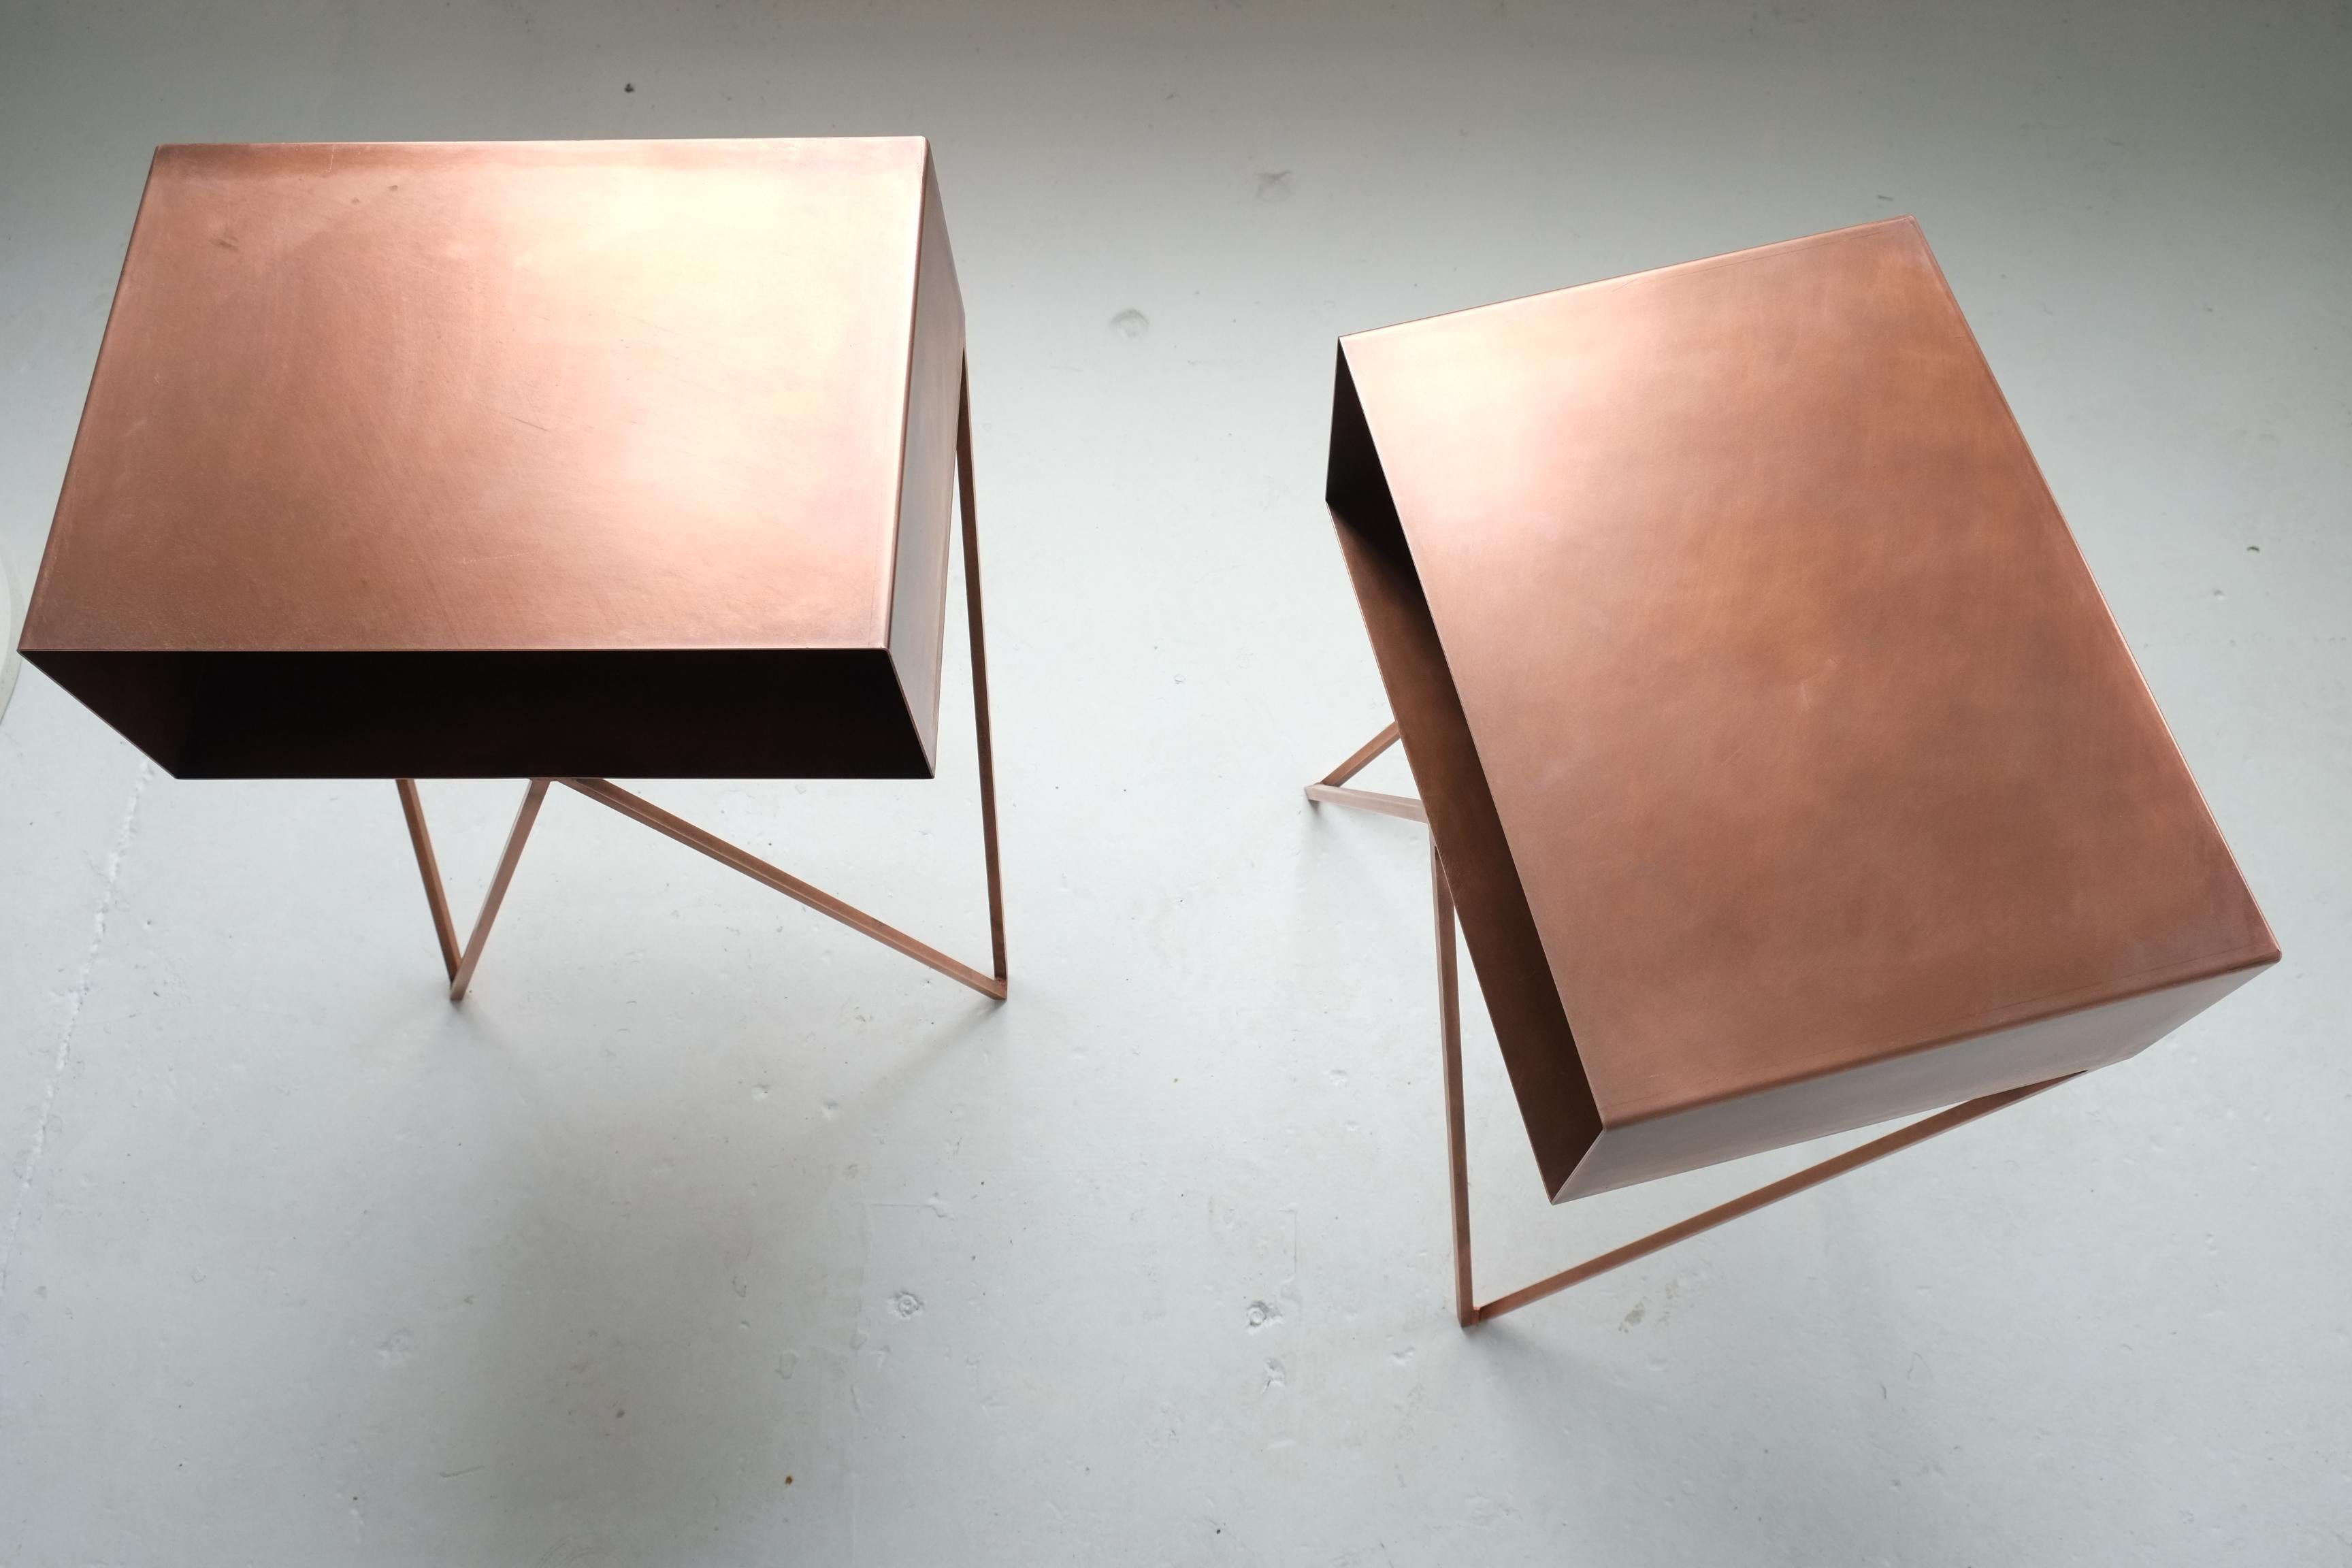 A pair of Robot side tables in oxidized copper. Each Robot table is individually coated in copper so they all have an absolutely unique finish. The tables are then hand-finished with beeswax for protection. The look of the side tables changes over